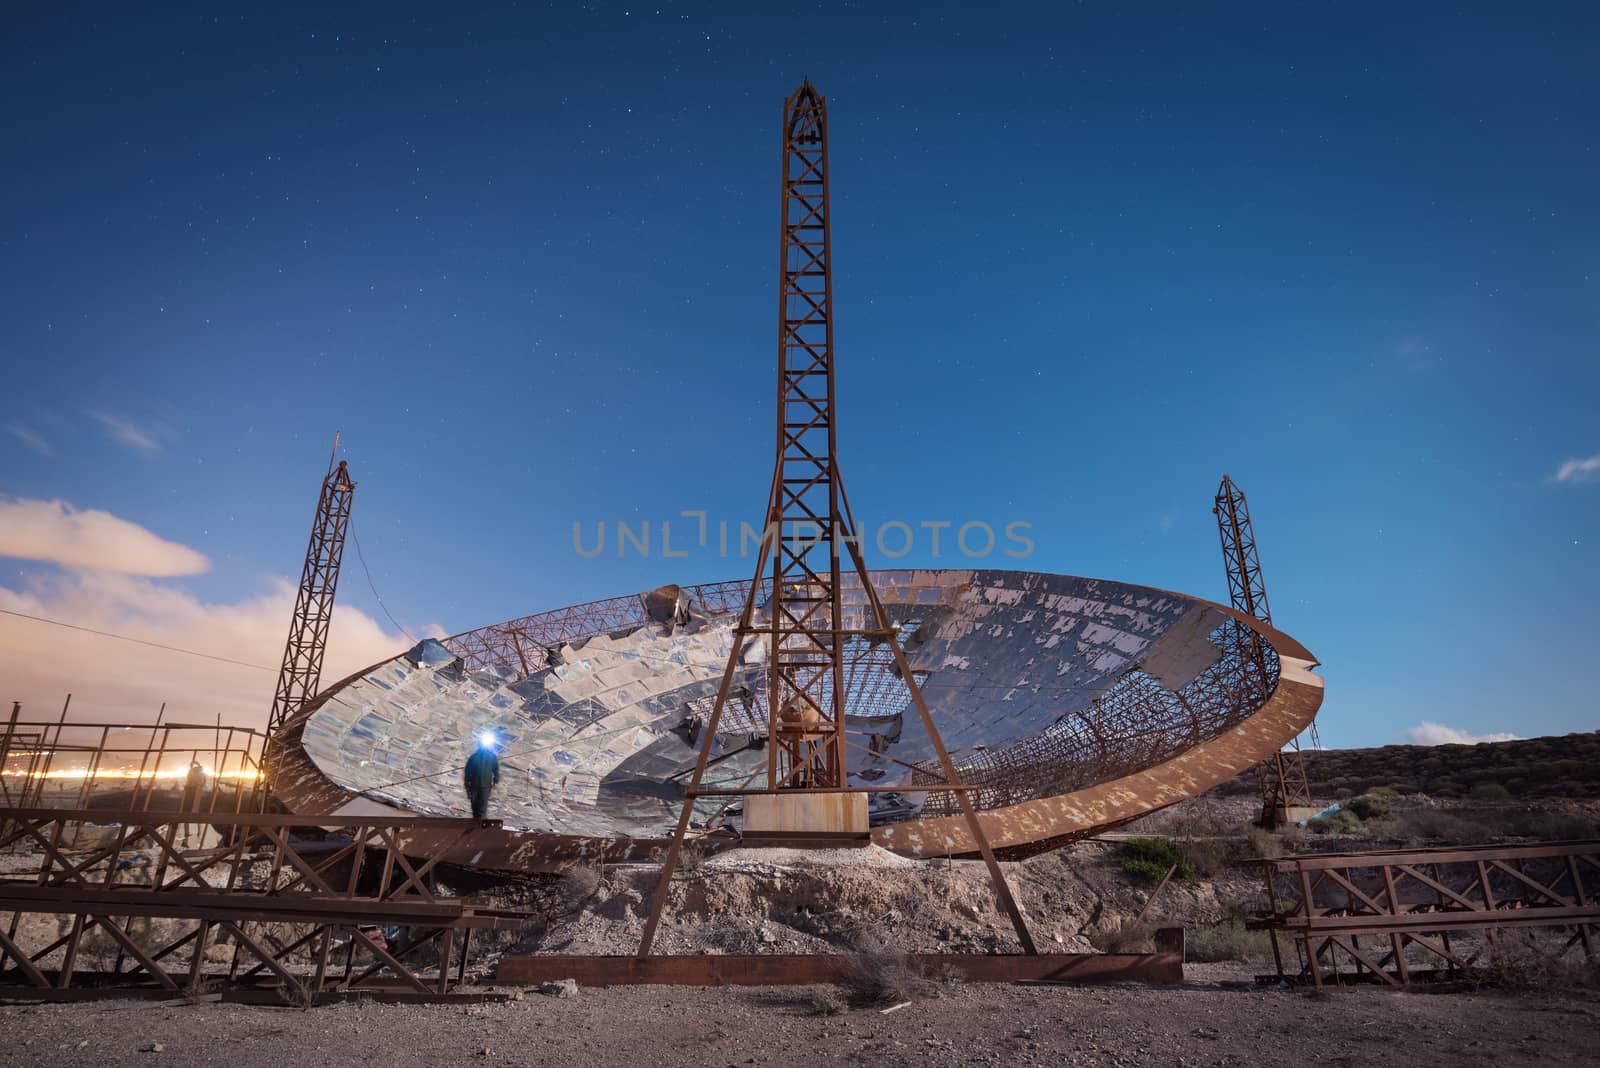 Night photography of a ruined setellite dish antenna in south Tenerife, Canary islands, Spain.